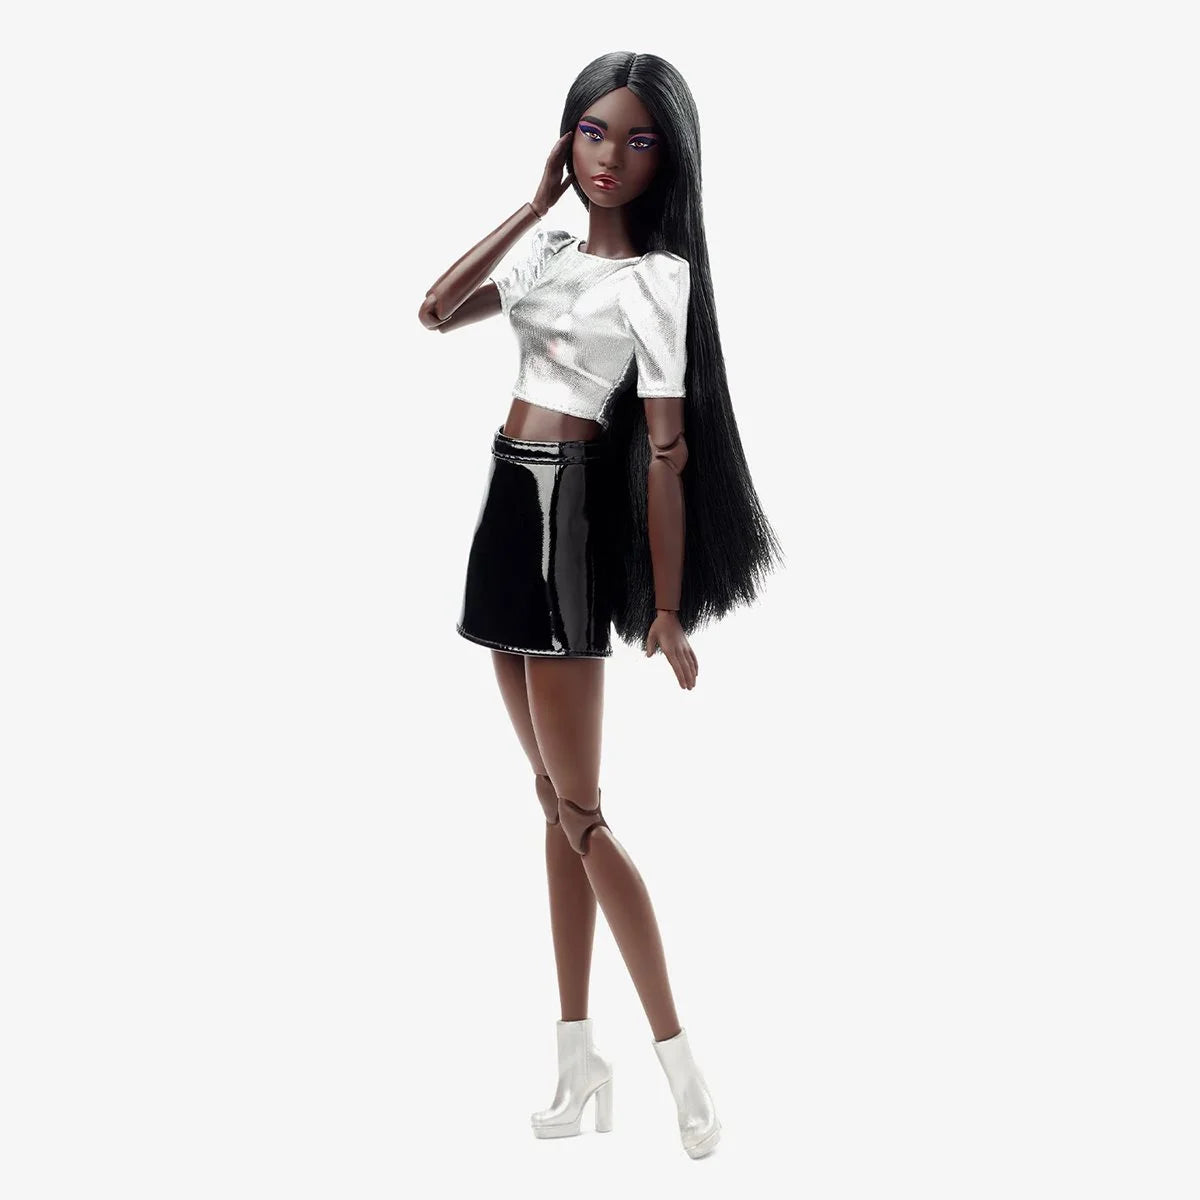 Barbie Looks Doll Tall with Long Hair